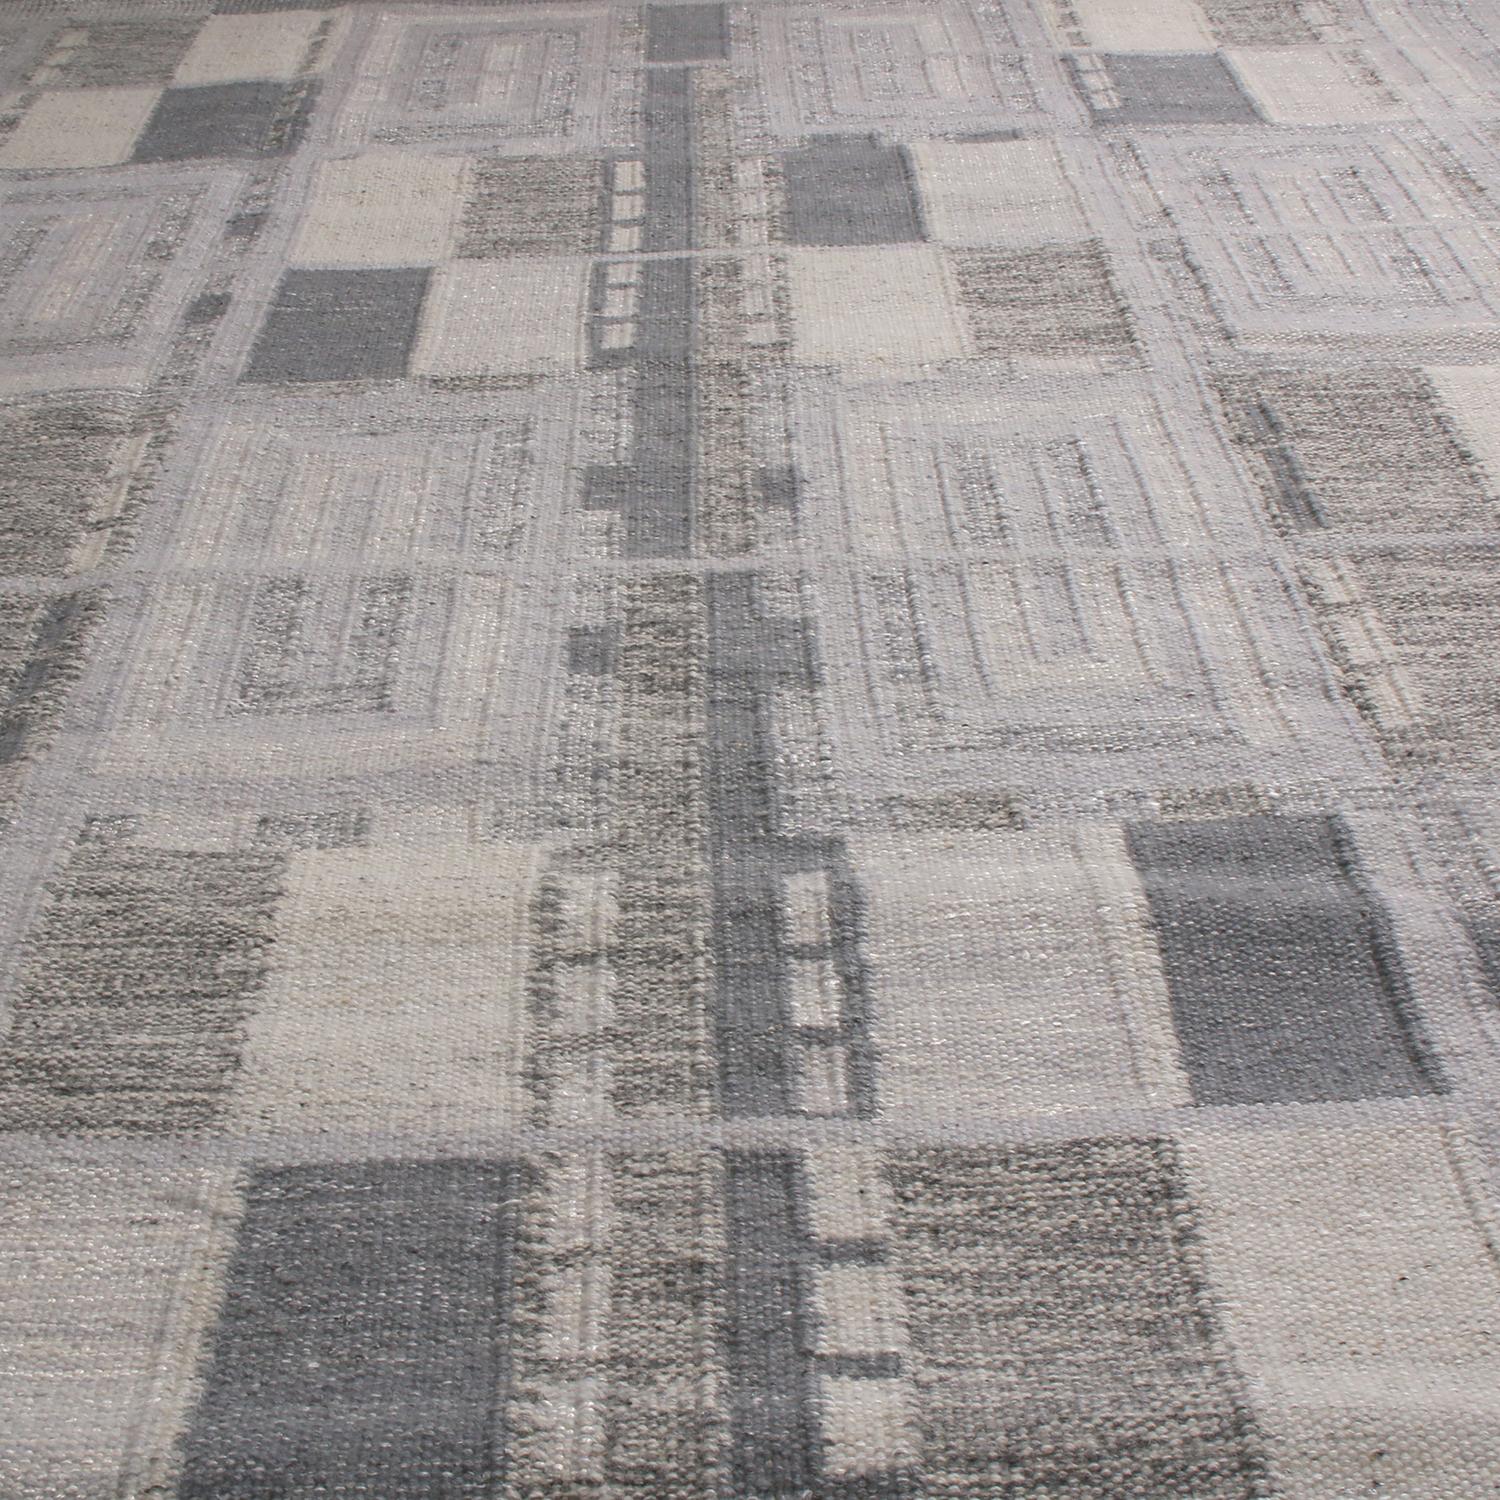 A 9x12 ode to celebrated Swedish flat weave styles from Rug & Kilim’s Scandinavian-inspired kilim collection, handwoven with high-quality New Zealand wool featuring a chic geometric all-over field design with Industrial and forgiving multi-tonal